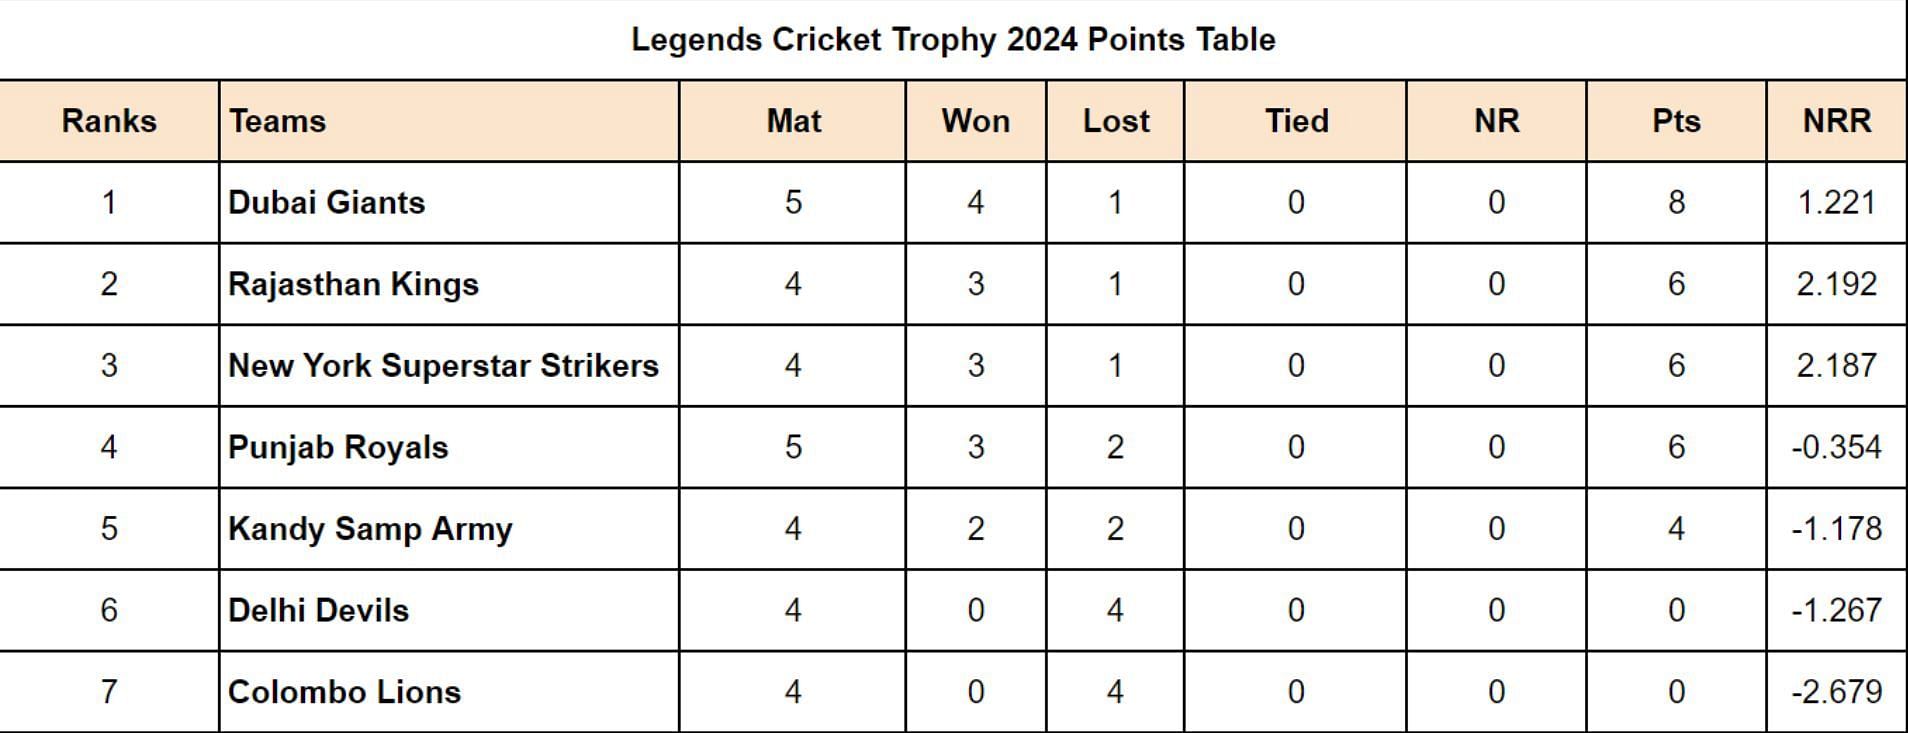 Legends Cricket Trophy 2024 Points Table Updated after Match 15